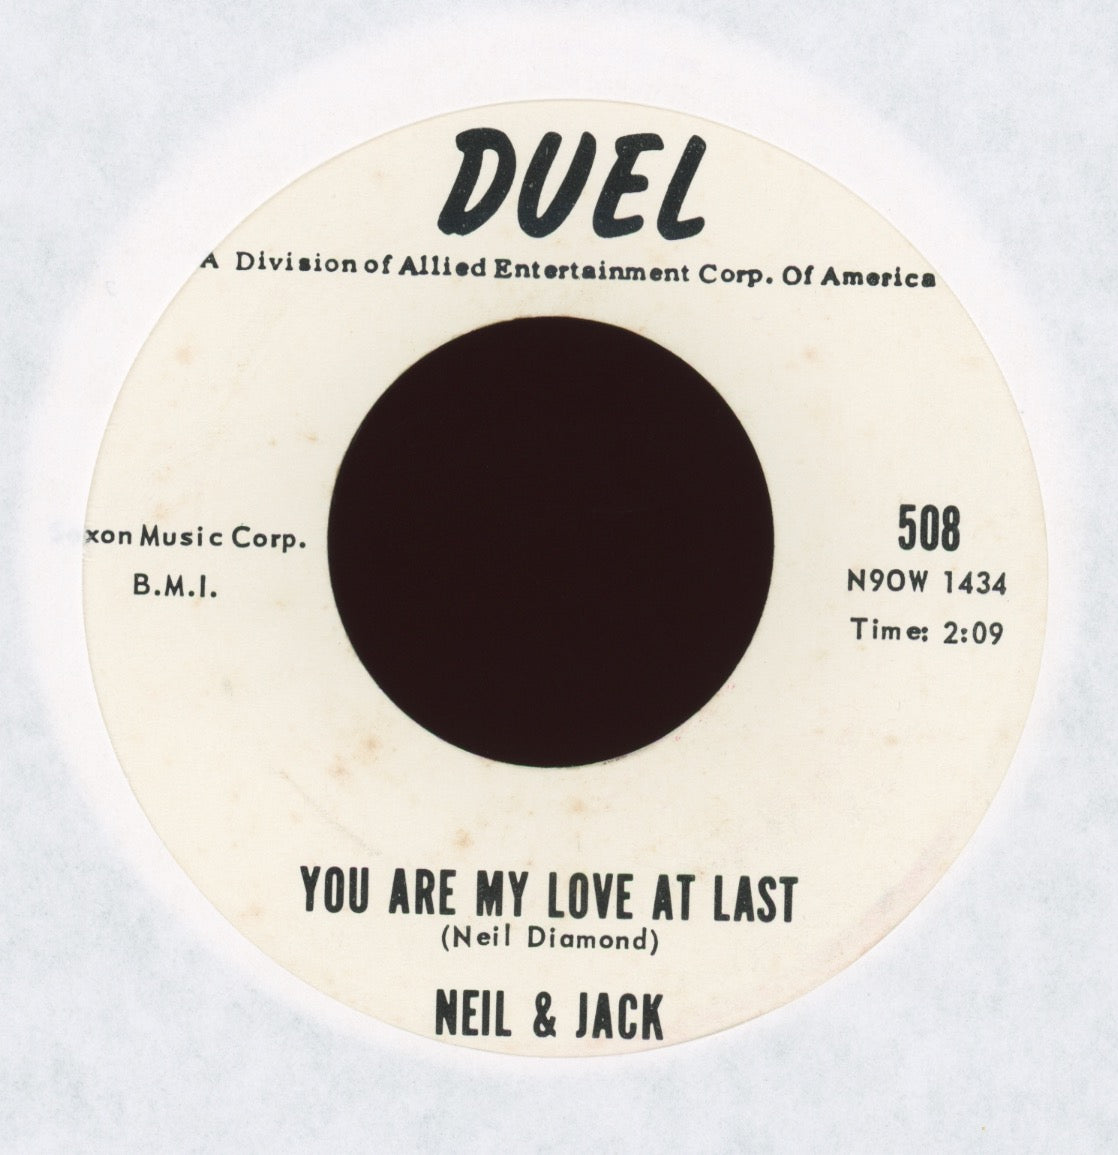 Neil & Jack - You Are My Love At Last on Duel